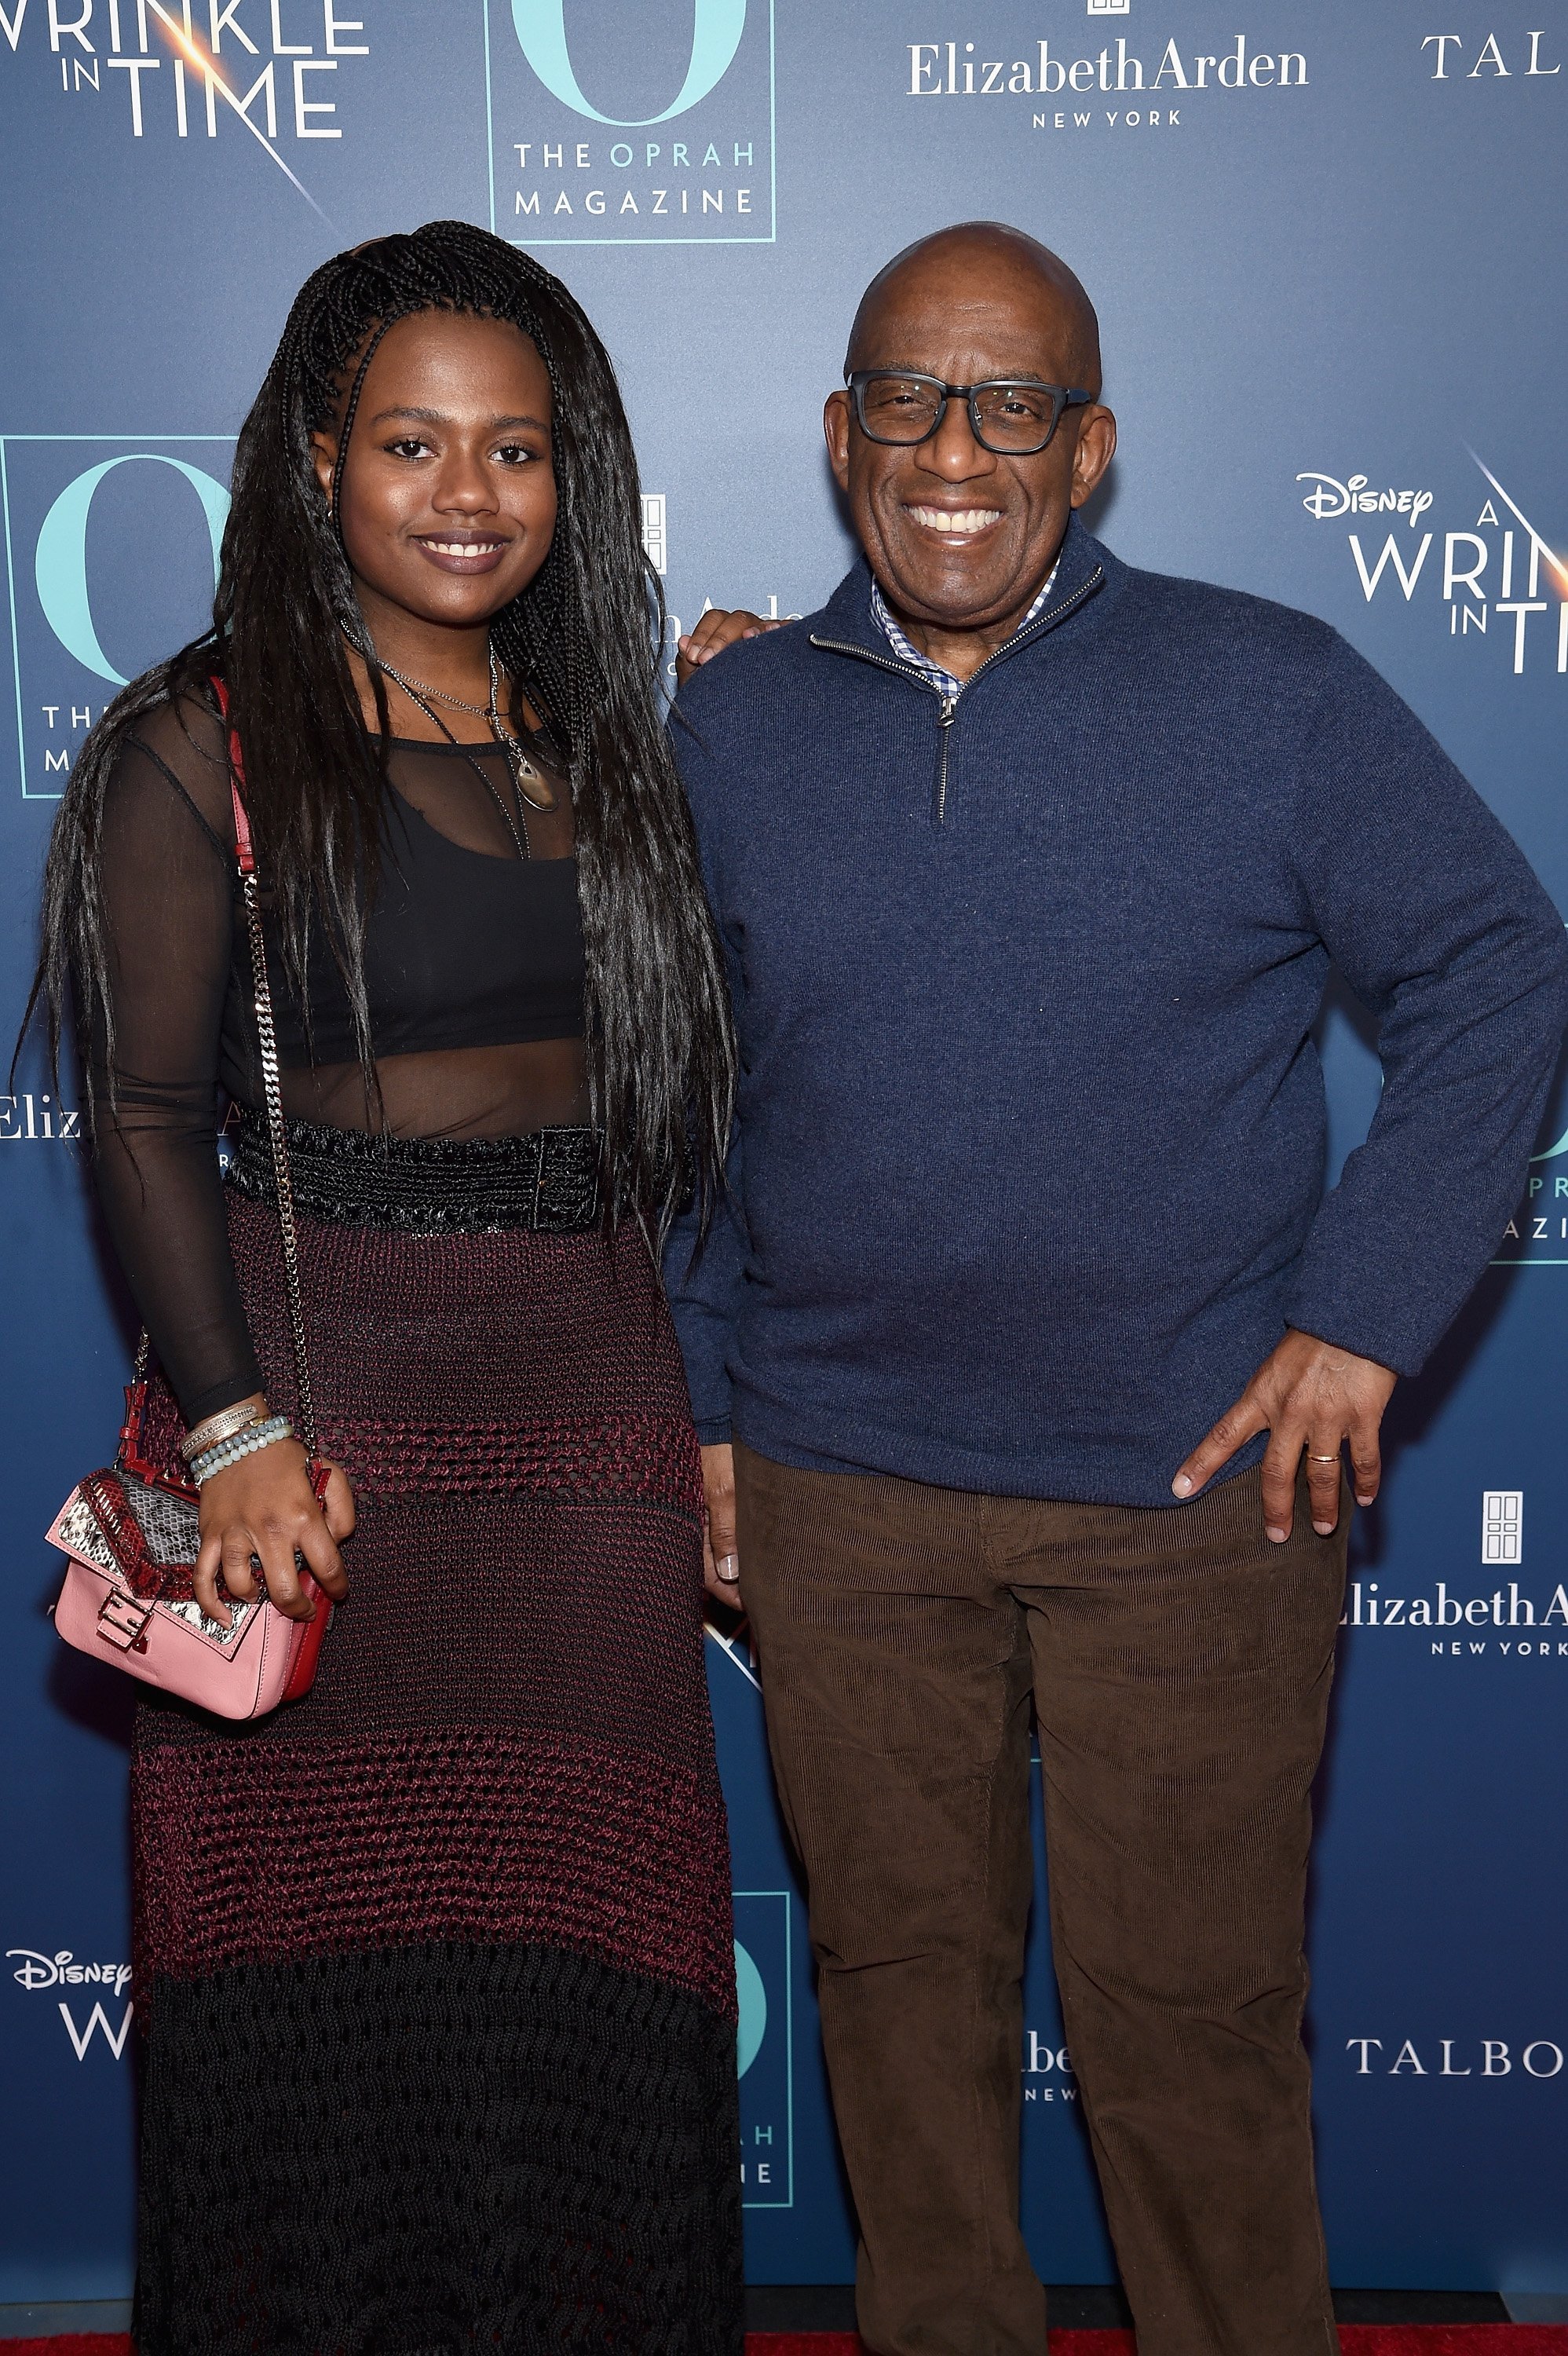 Al Rocker and daughter attend The Oprah Magazine hosts special NYC screening of "A Wrinkle In Time" at Walter Reade Theater. | Source: Getty Images